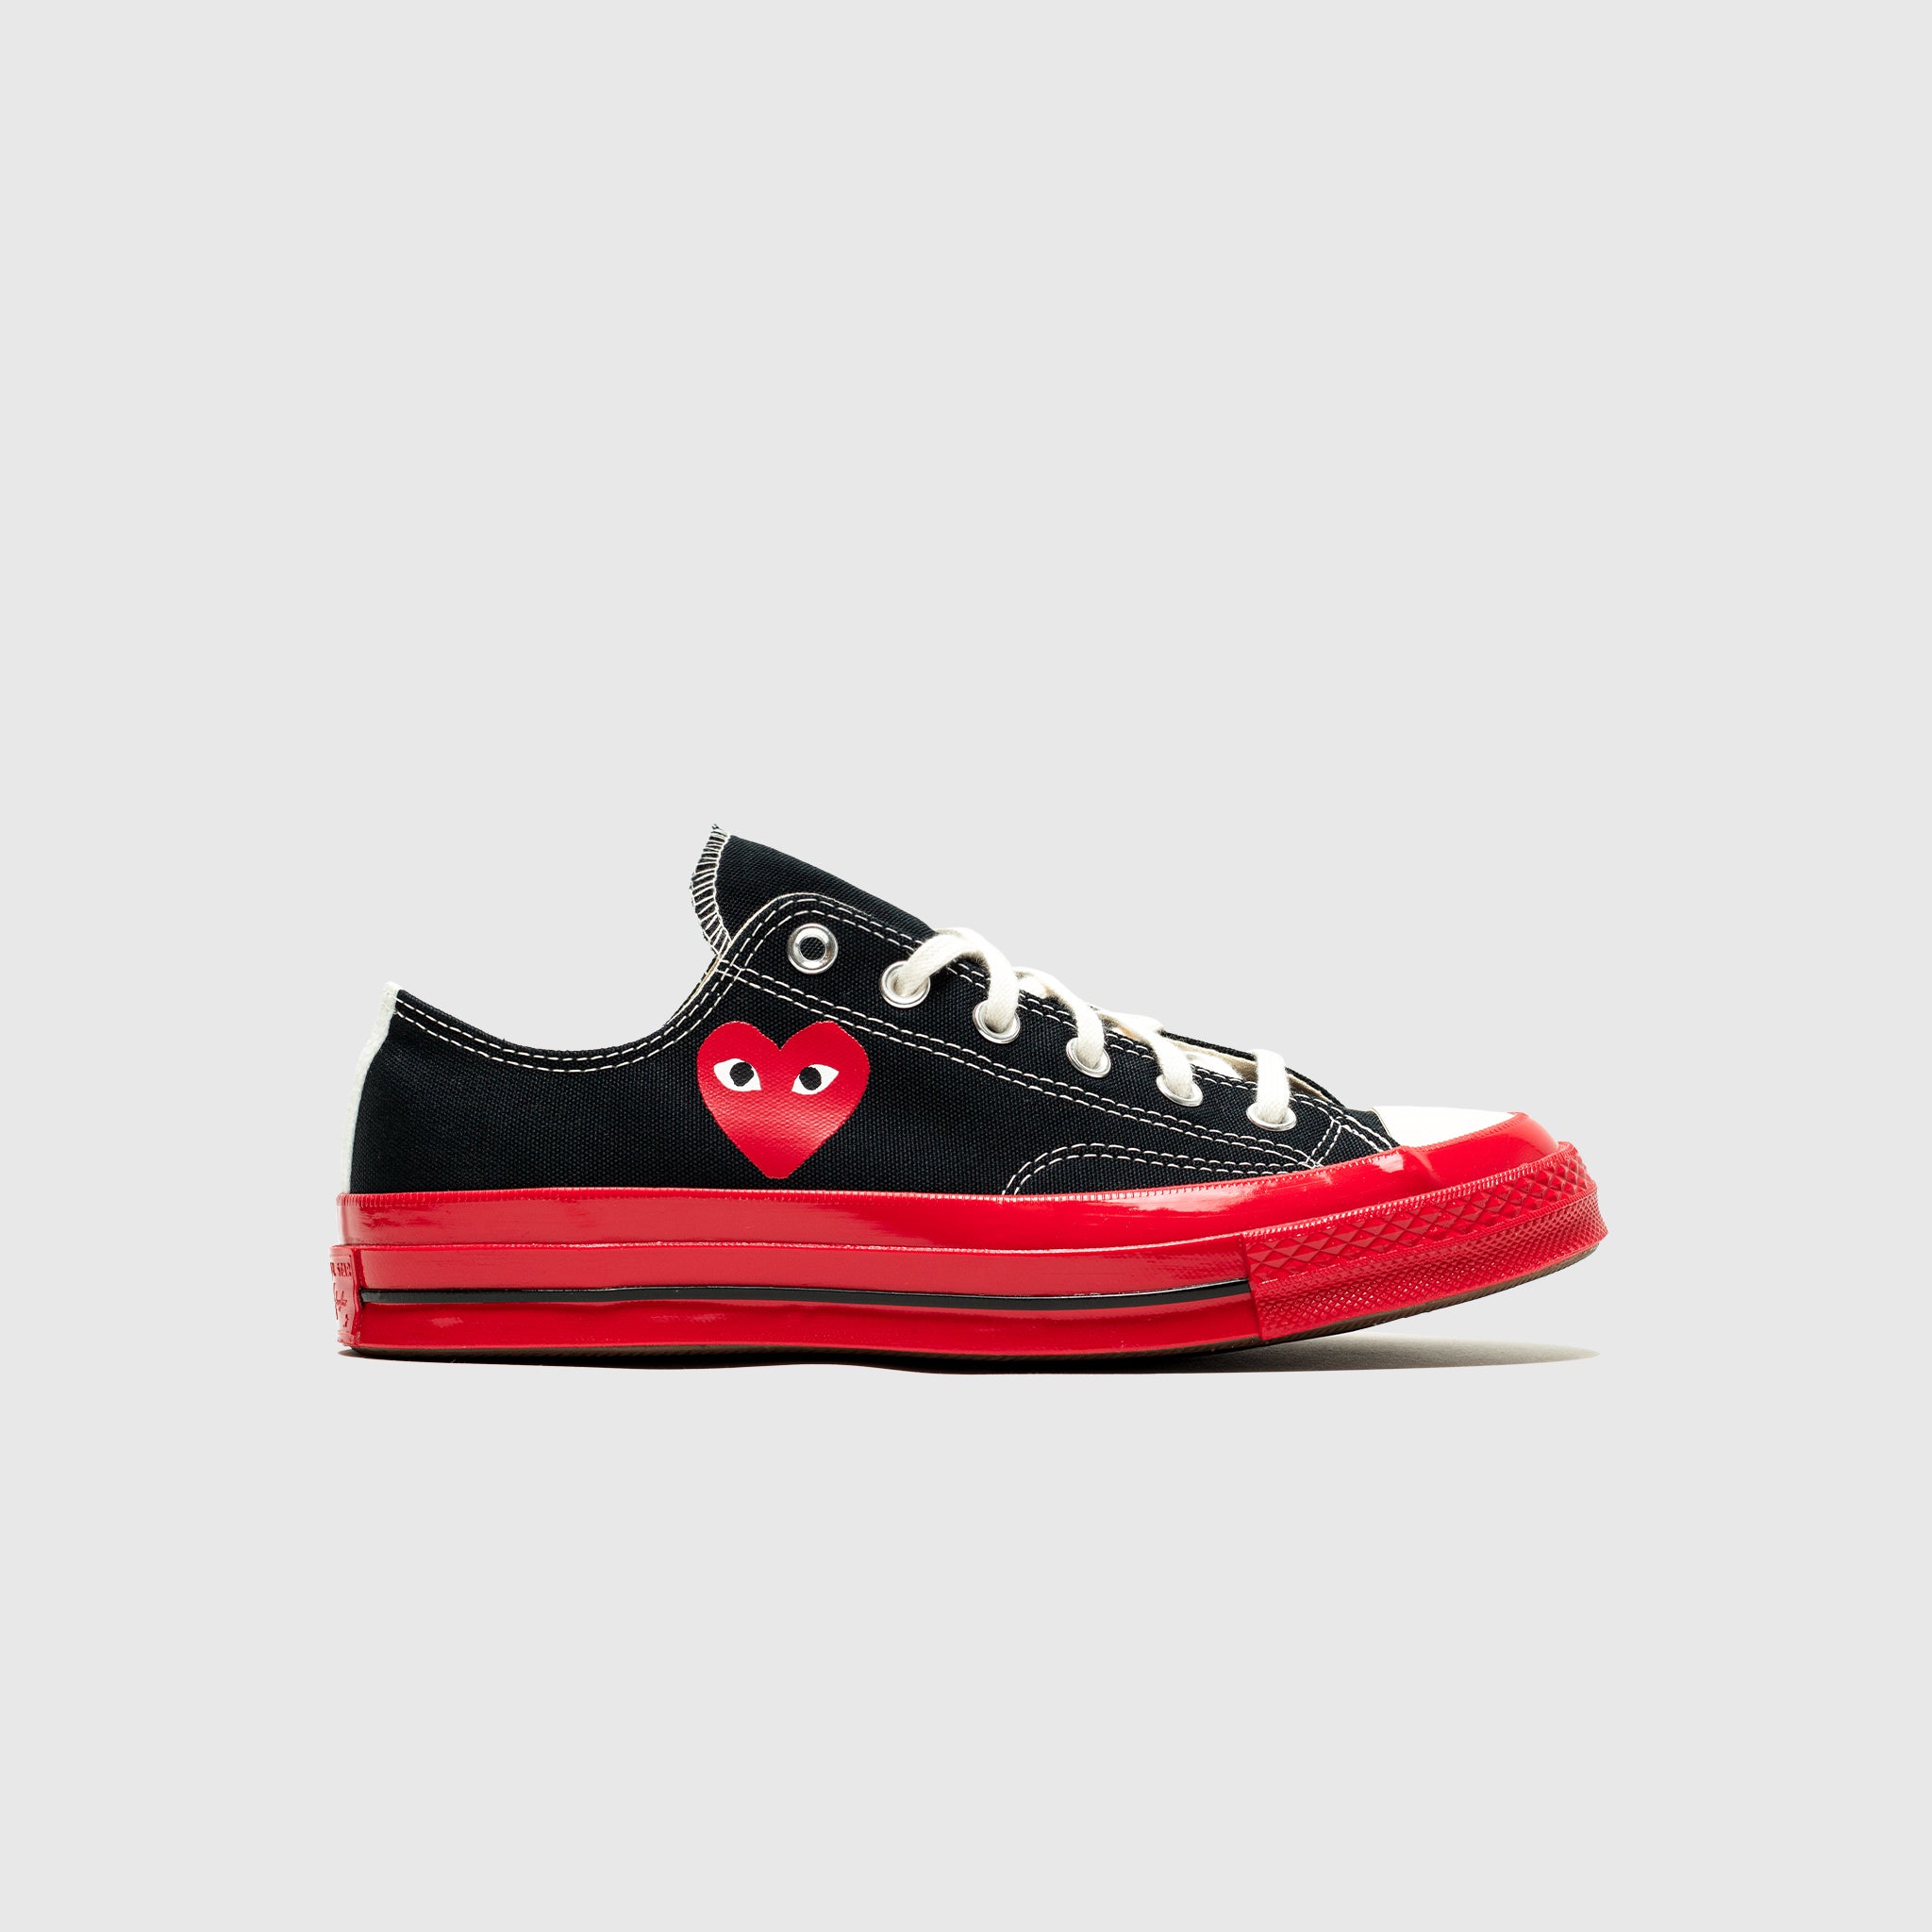 CHUCK TAYLOR ALL-STAR OX "BLACK RED" – PACKER SHOES